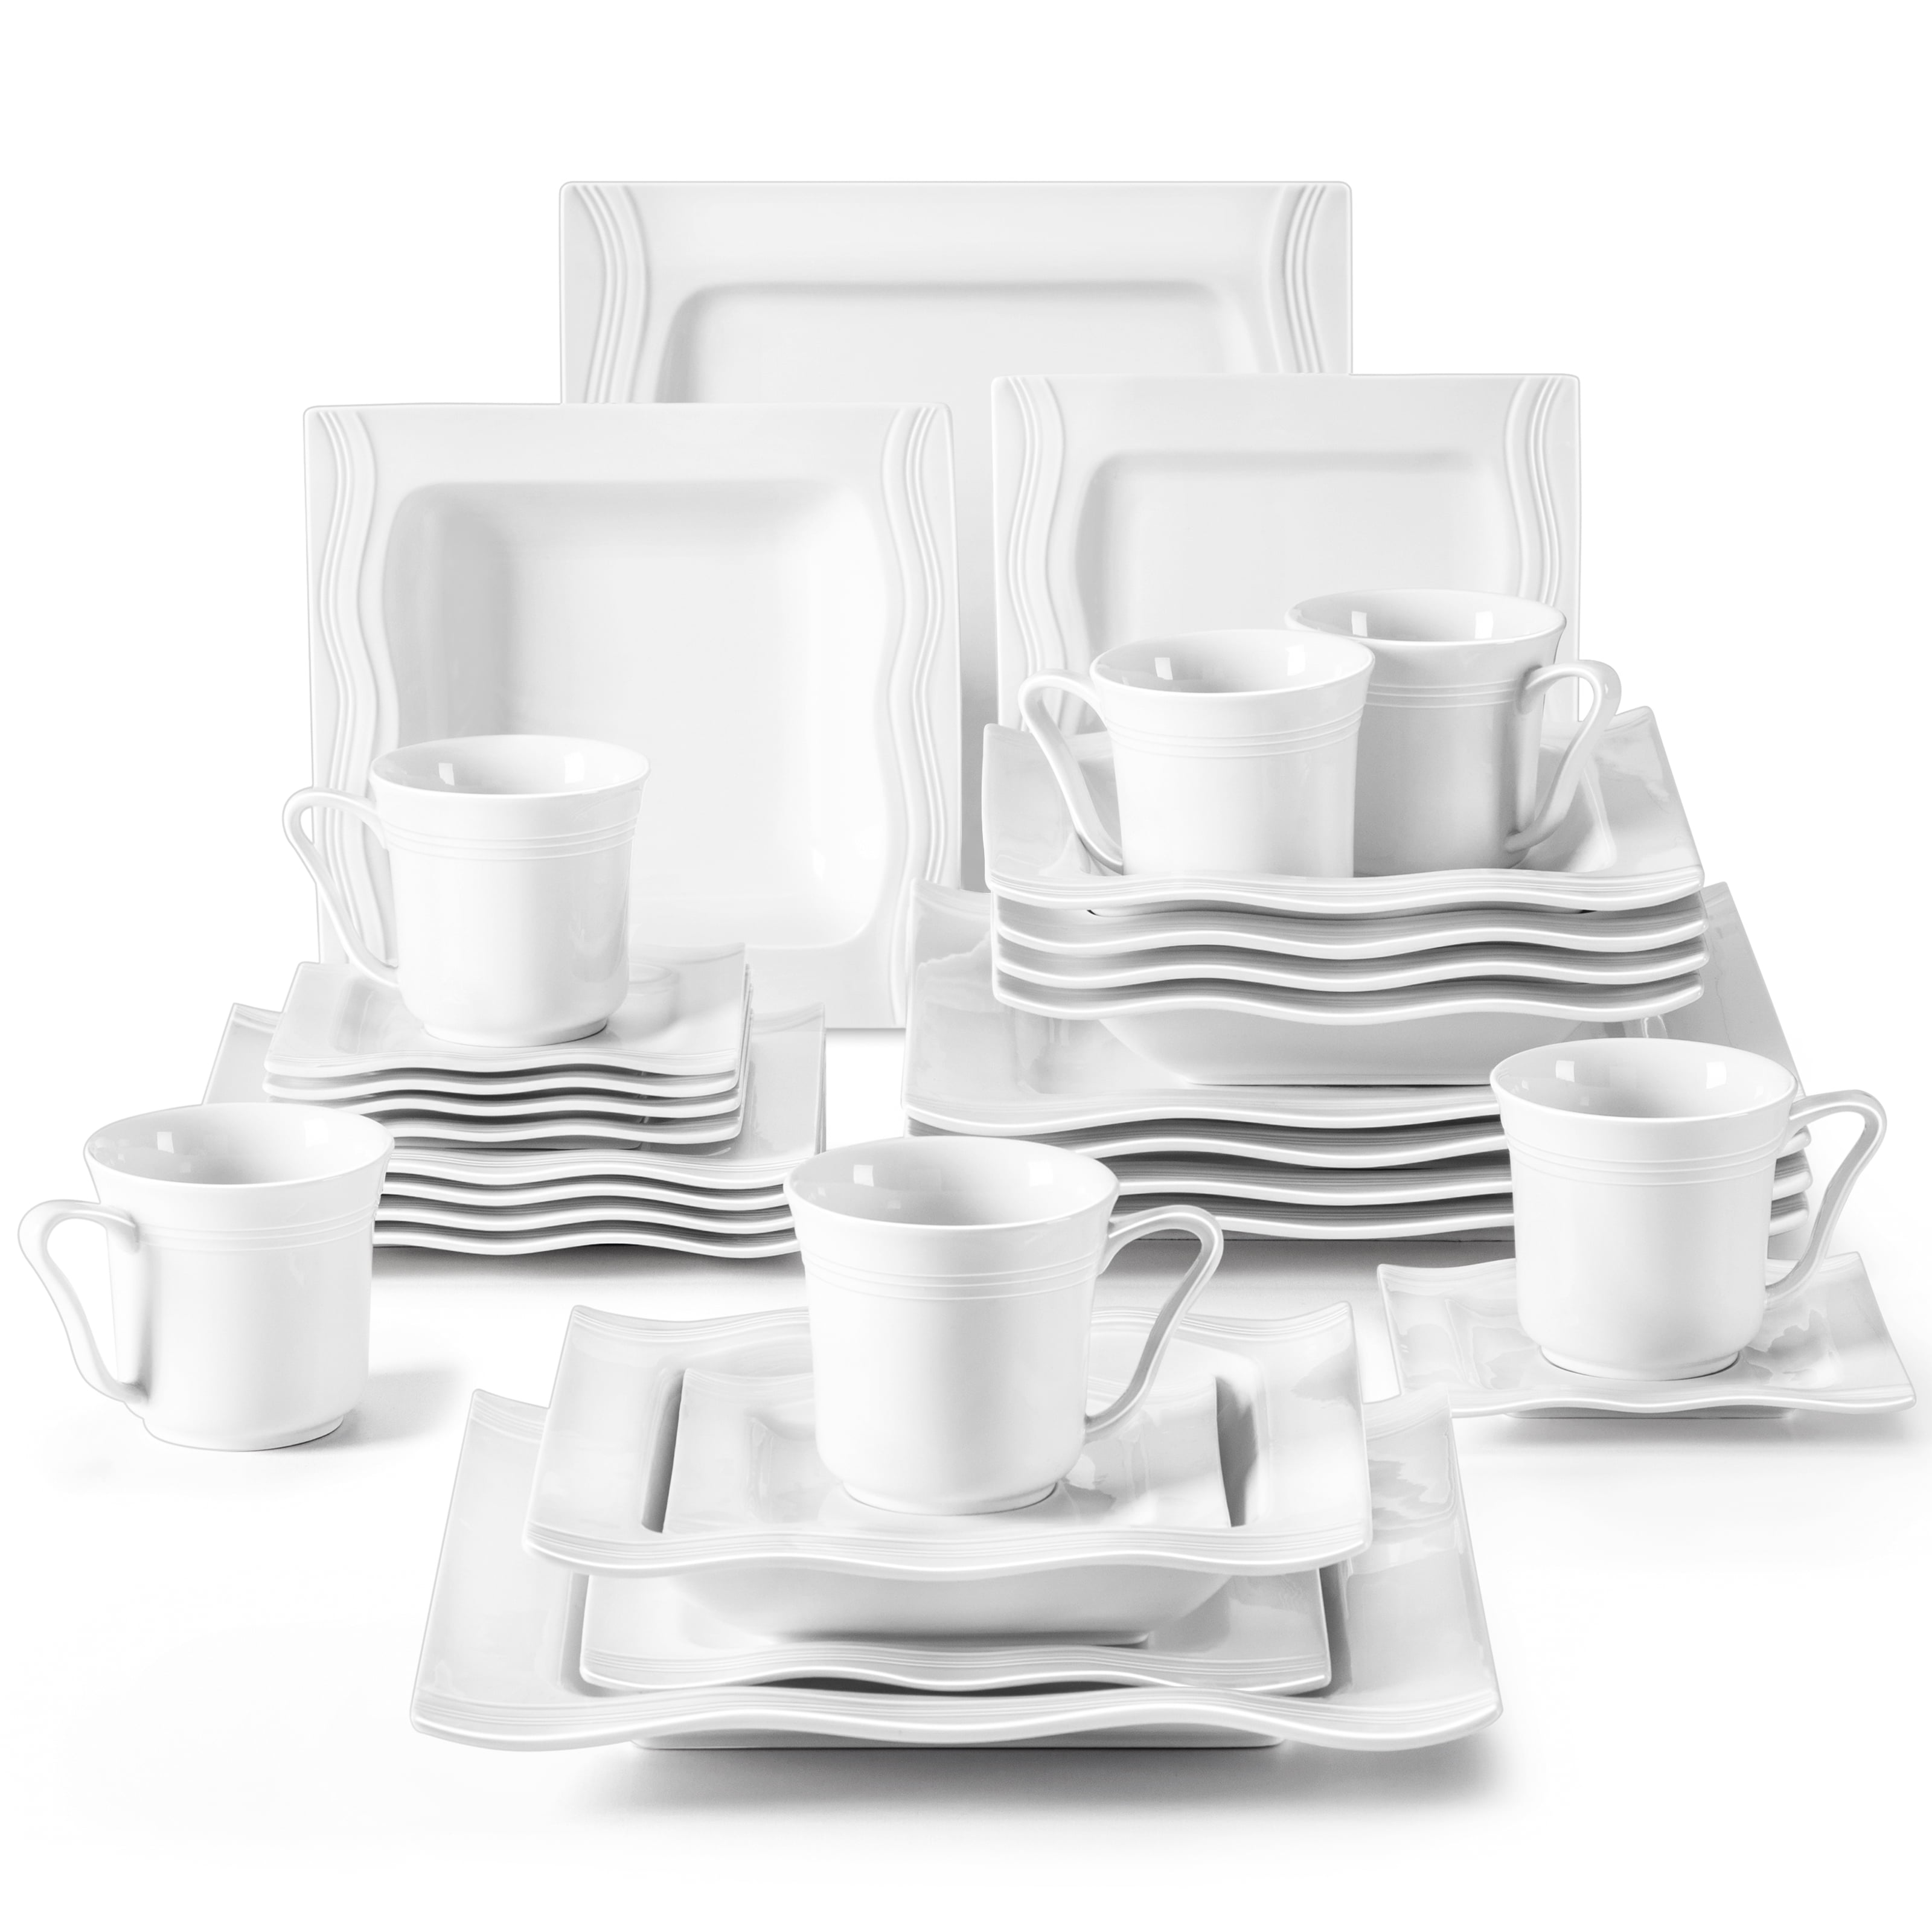 36-Piece Dinner Set Ivory White Porcelain Tableware Set with 6 Cups/Saucers/Mugs/Dessert Plates/Soup Plates/Dinner Plates Series Amparo Service for 6 MALACASA 